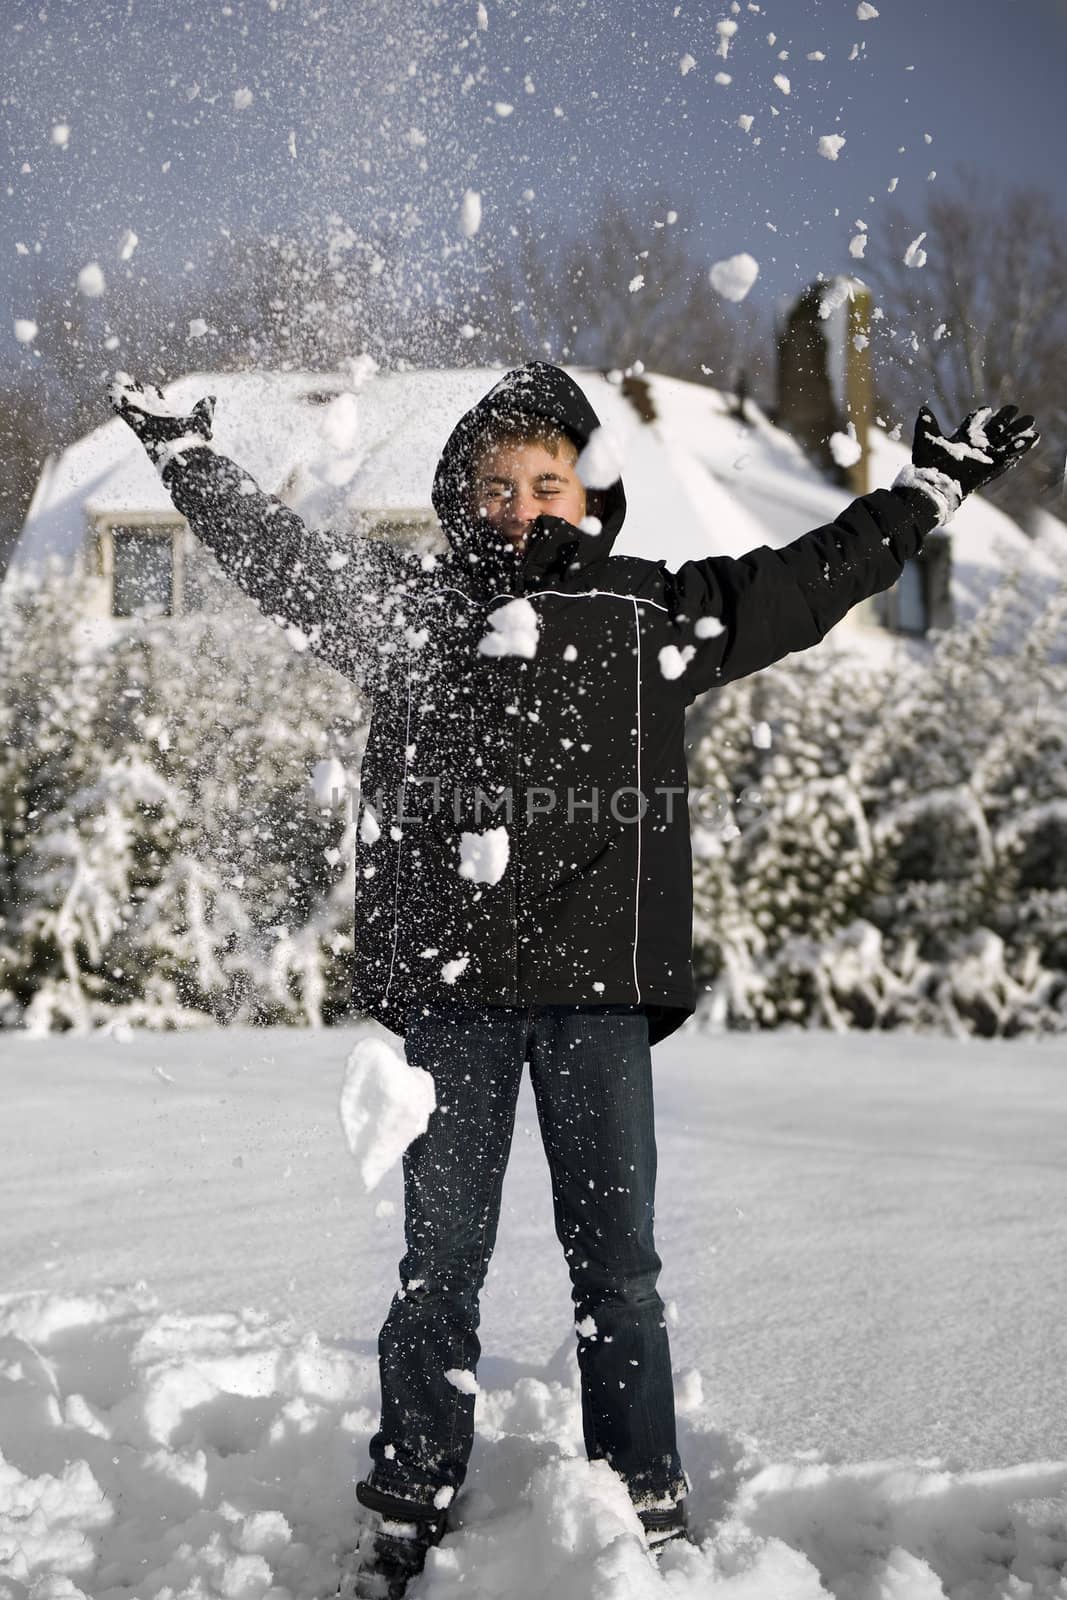 a young boy in the snow having fun